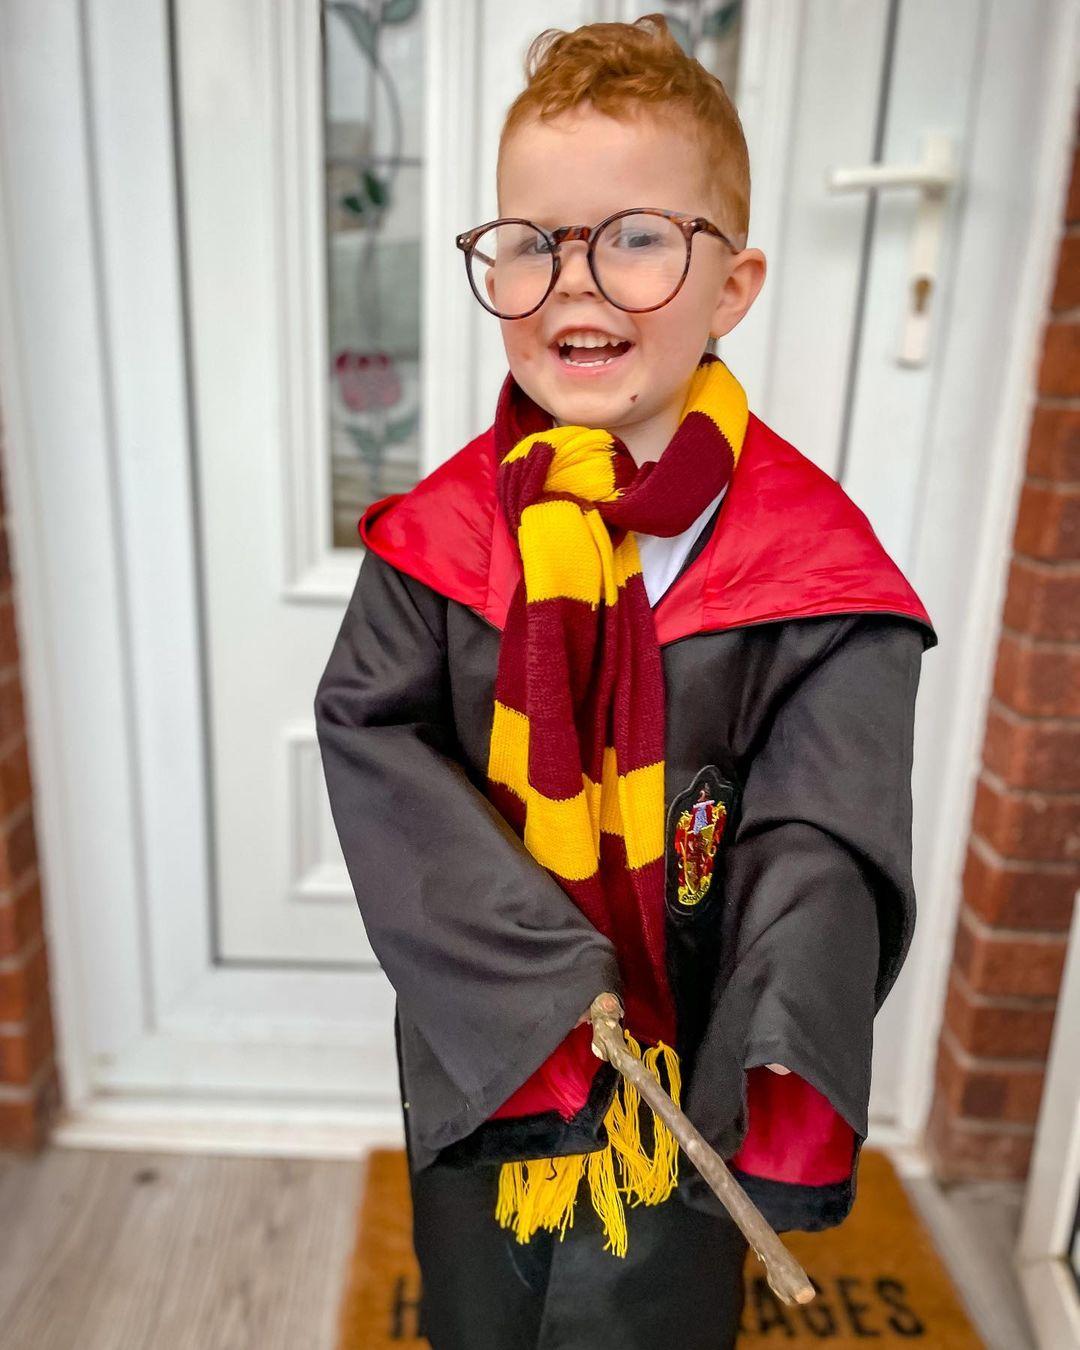 class="content__text"
 "Red hair and a hand-me-down robe. You must be a Weasley."
Well actually it’s Harry Potter, as he was adamant he was Harry Pot Pot as he calls him.
Happy Belated World Book Later.

 #worldbookday #worldbookdaycostume #harrypotter #ronweasley #magical #fancydress #saturdayvibes #schoollife 
 